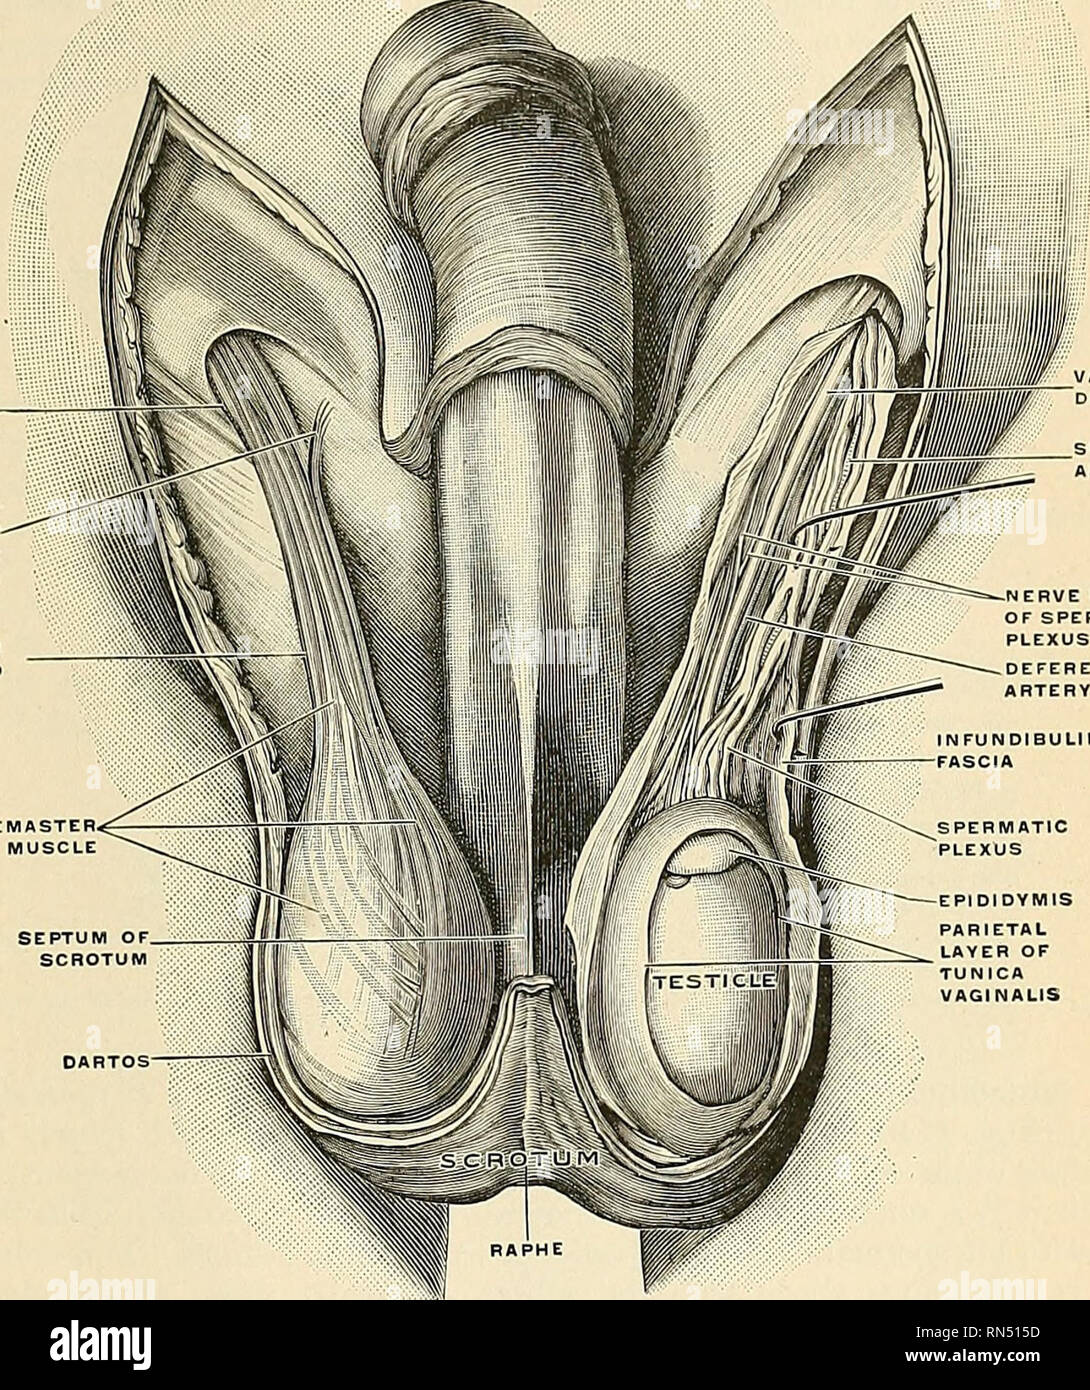 . Anatomy, descriptive and applied. Anatomy. THE TESTICLES AND THEIR CO VEHINGS i;i7: and robust it is siiort, corrugated, and closely applied to the testes. The wrinkles in the scrotum are called rugae. The scrotum consists of two layers, the integument and the dartos. The integument is very thin, of a brownisli color, and generally thrown into folds or ruo-re. It is provided with sebaceous follicles, the secretion of which has a peculiar odor, and is beset with thinly scattered, crisp hairs, the roots of which may be seen through tlie skin. ACCESSORY SLIP OF ORIGIN OF CREMASTER MUSCLE. RVE F Stock Photo